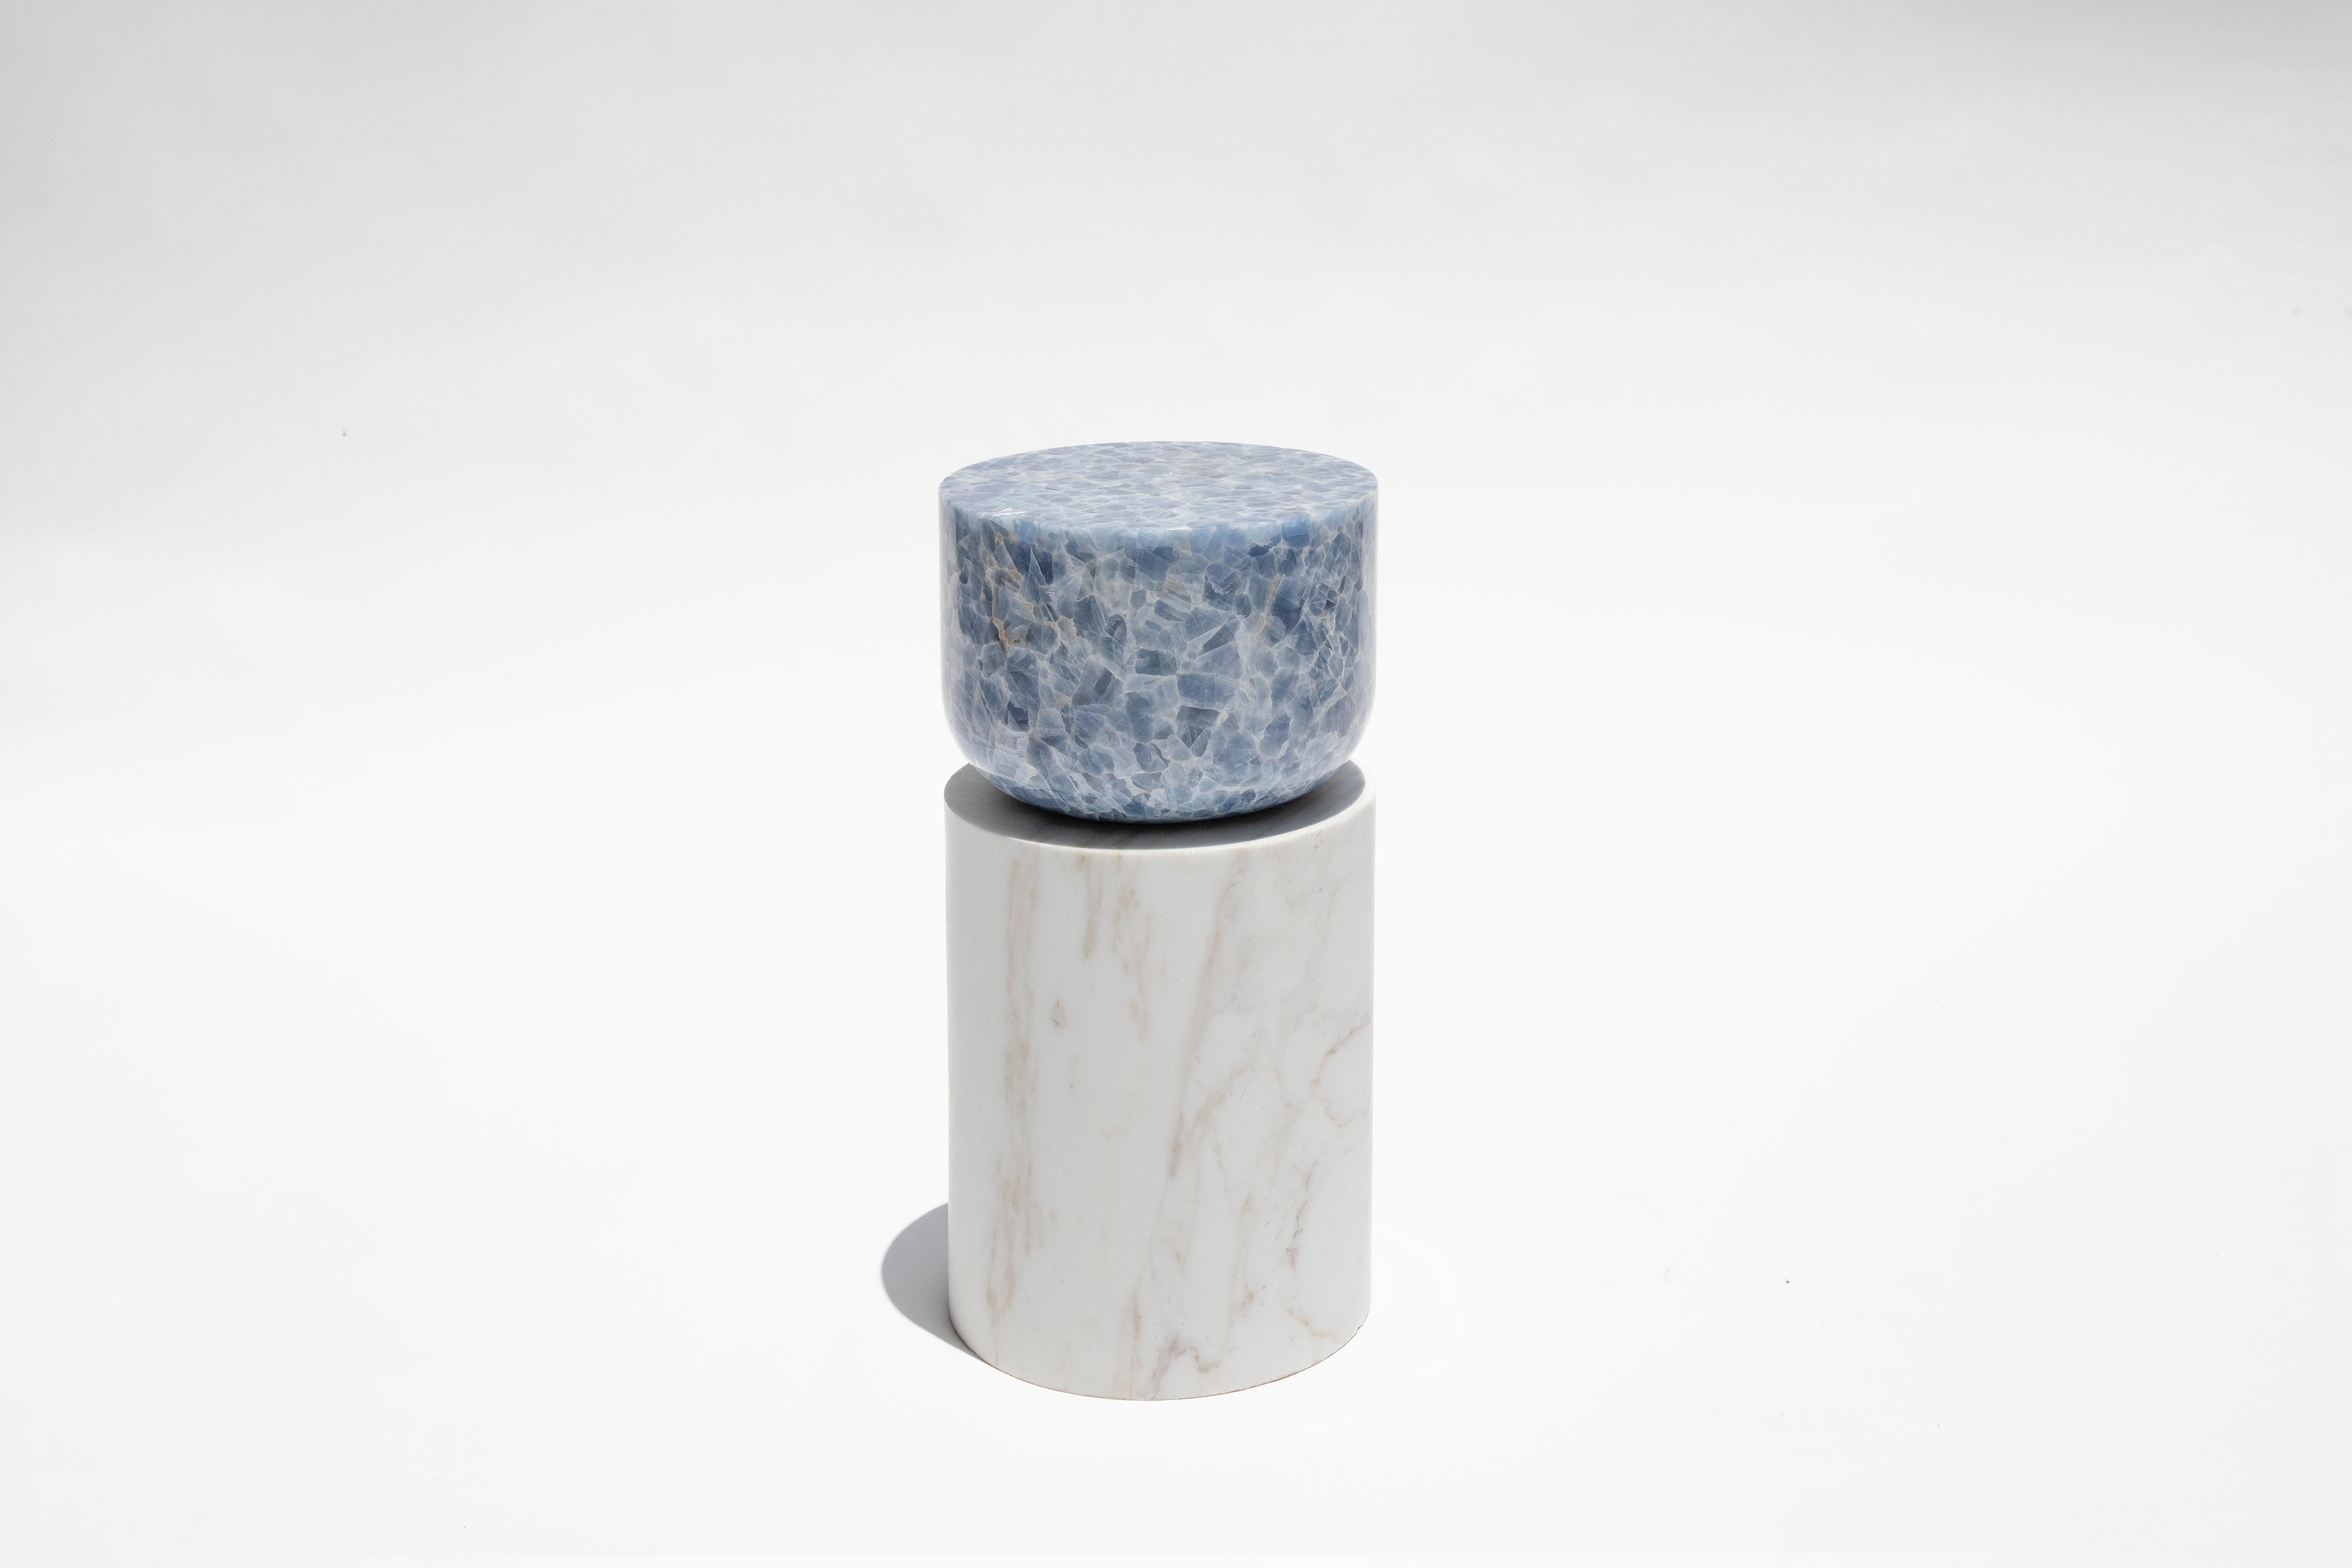 Organic Modern Volcanic Shade of Marble V Stool/Table by Sten Studio, REP by Tuleste Factory For Sale